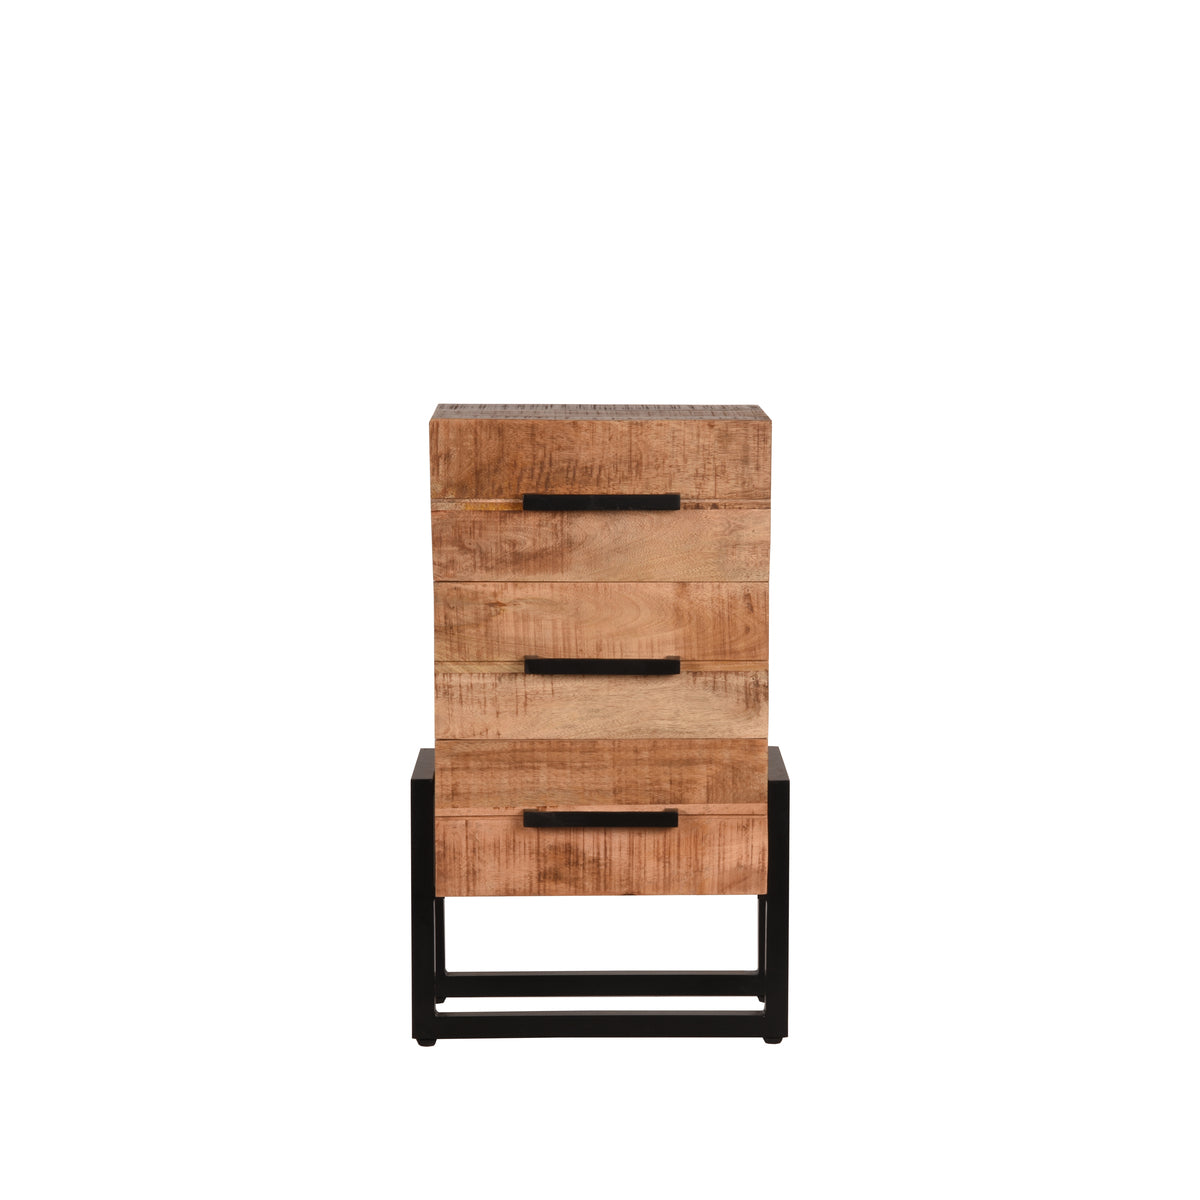 LABEL51 Chest of drawers Bolivia - Rough - Mango wood